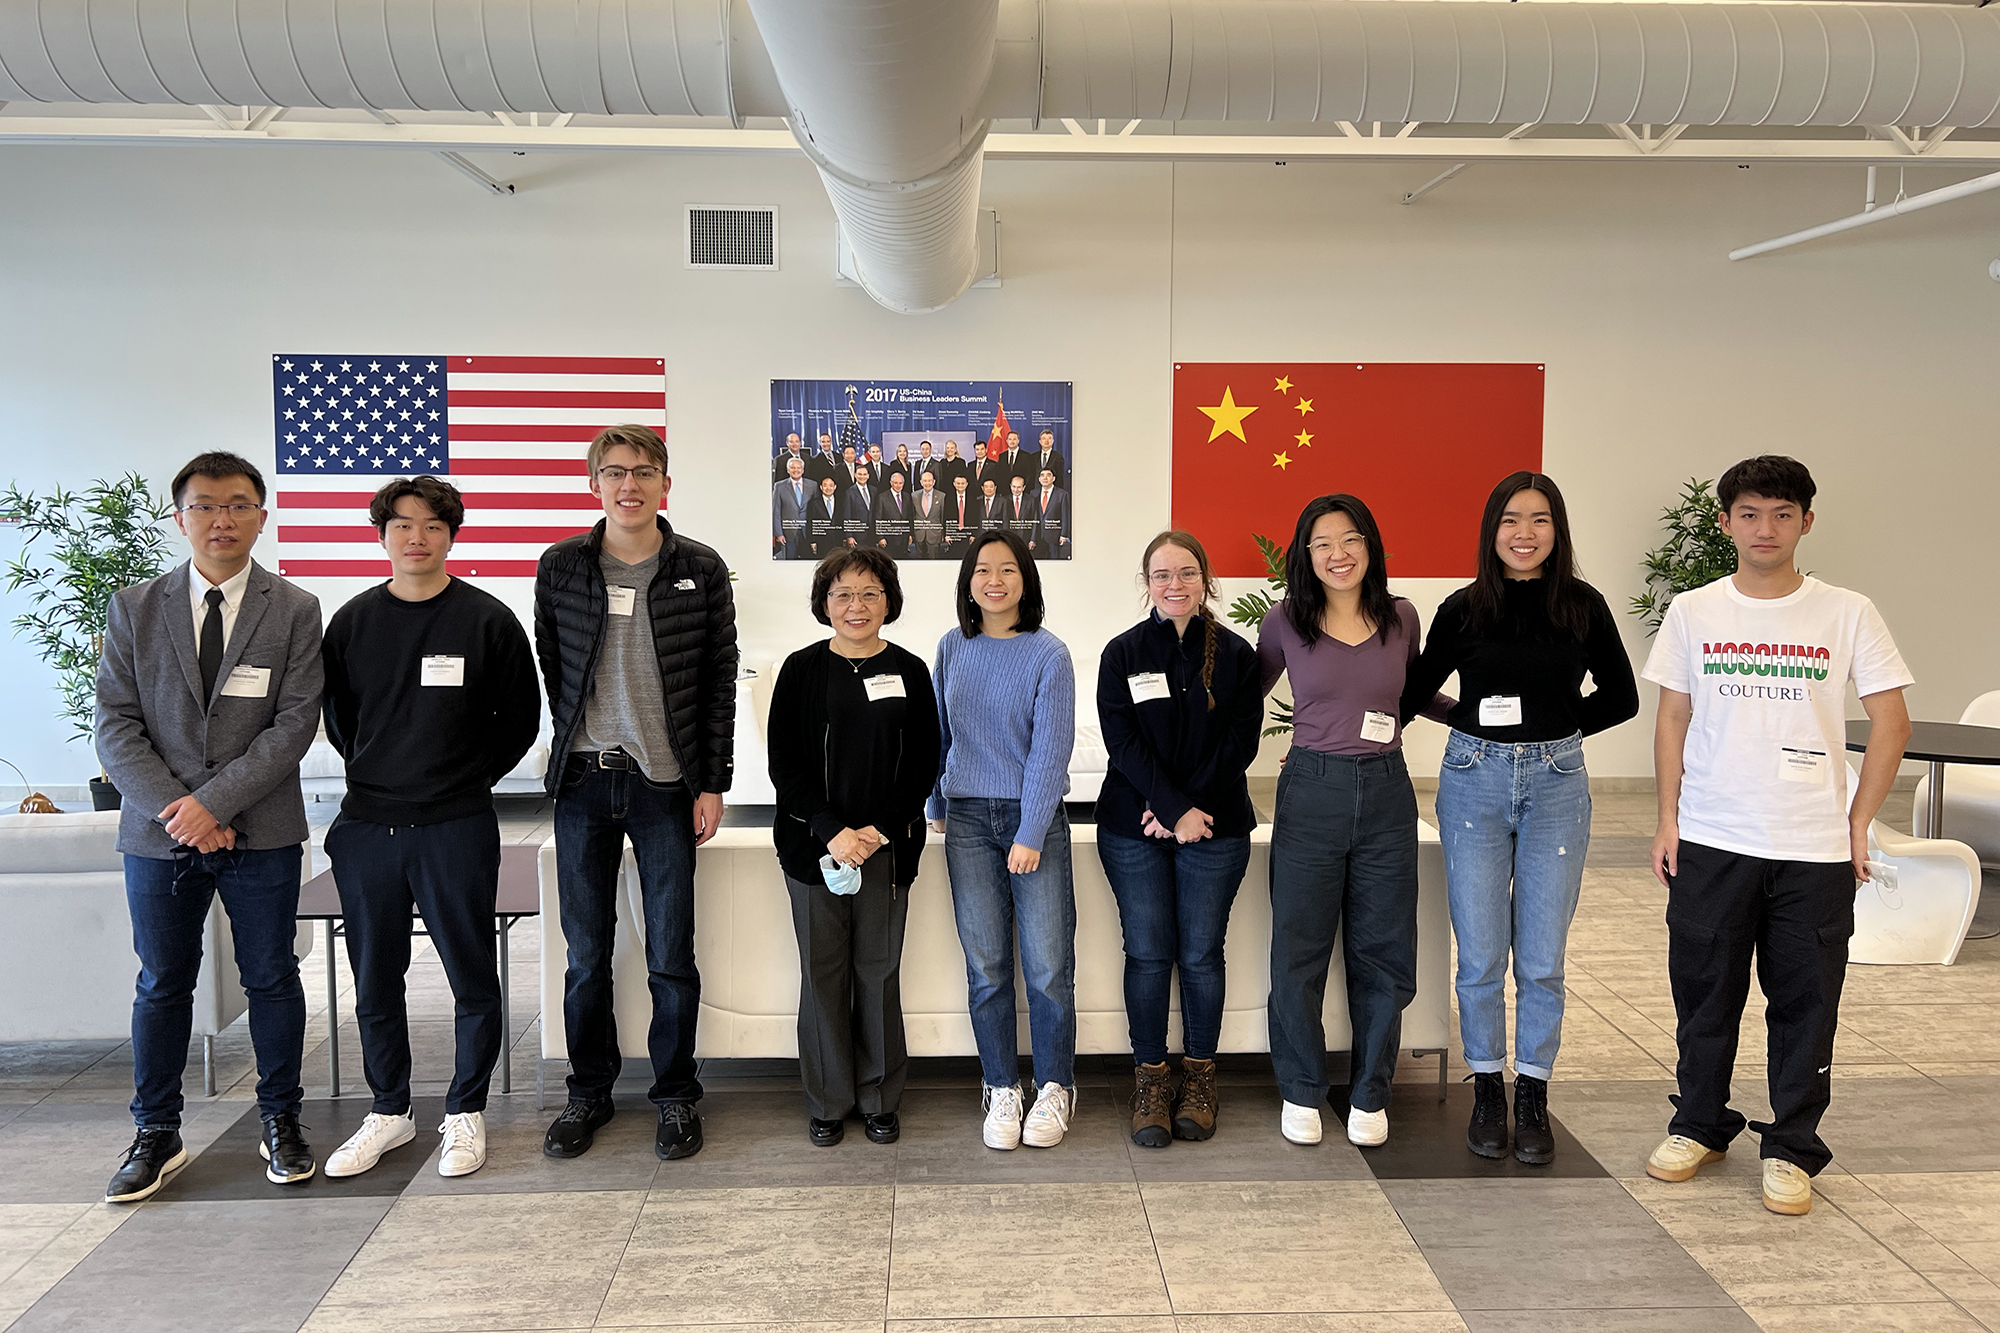 Students posing for a photo inside Fuyao America building